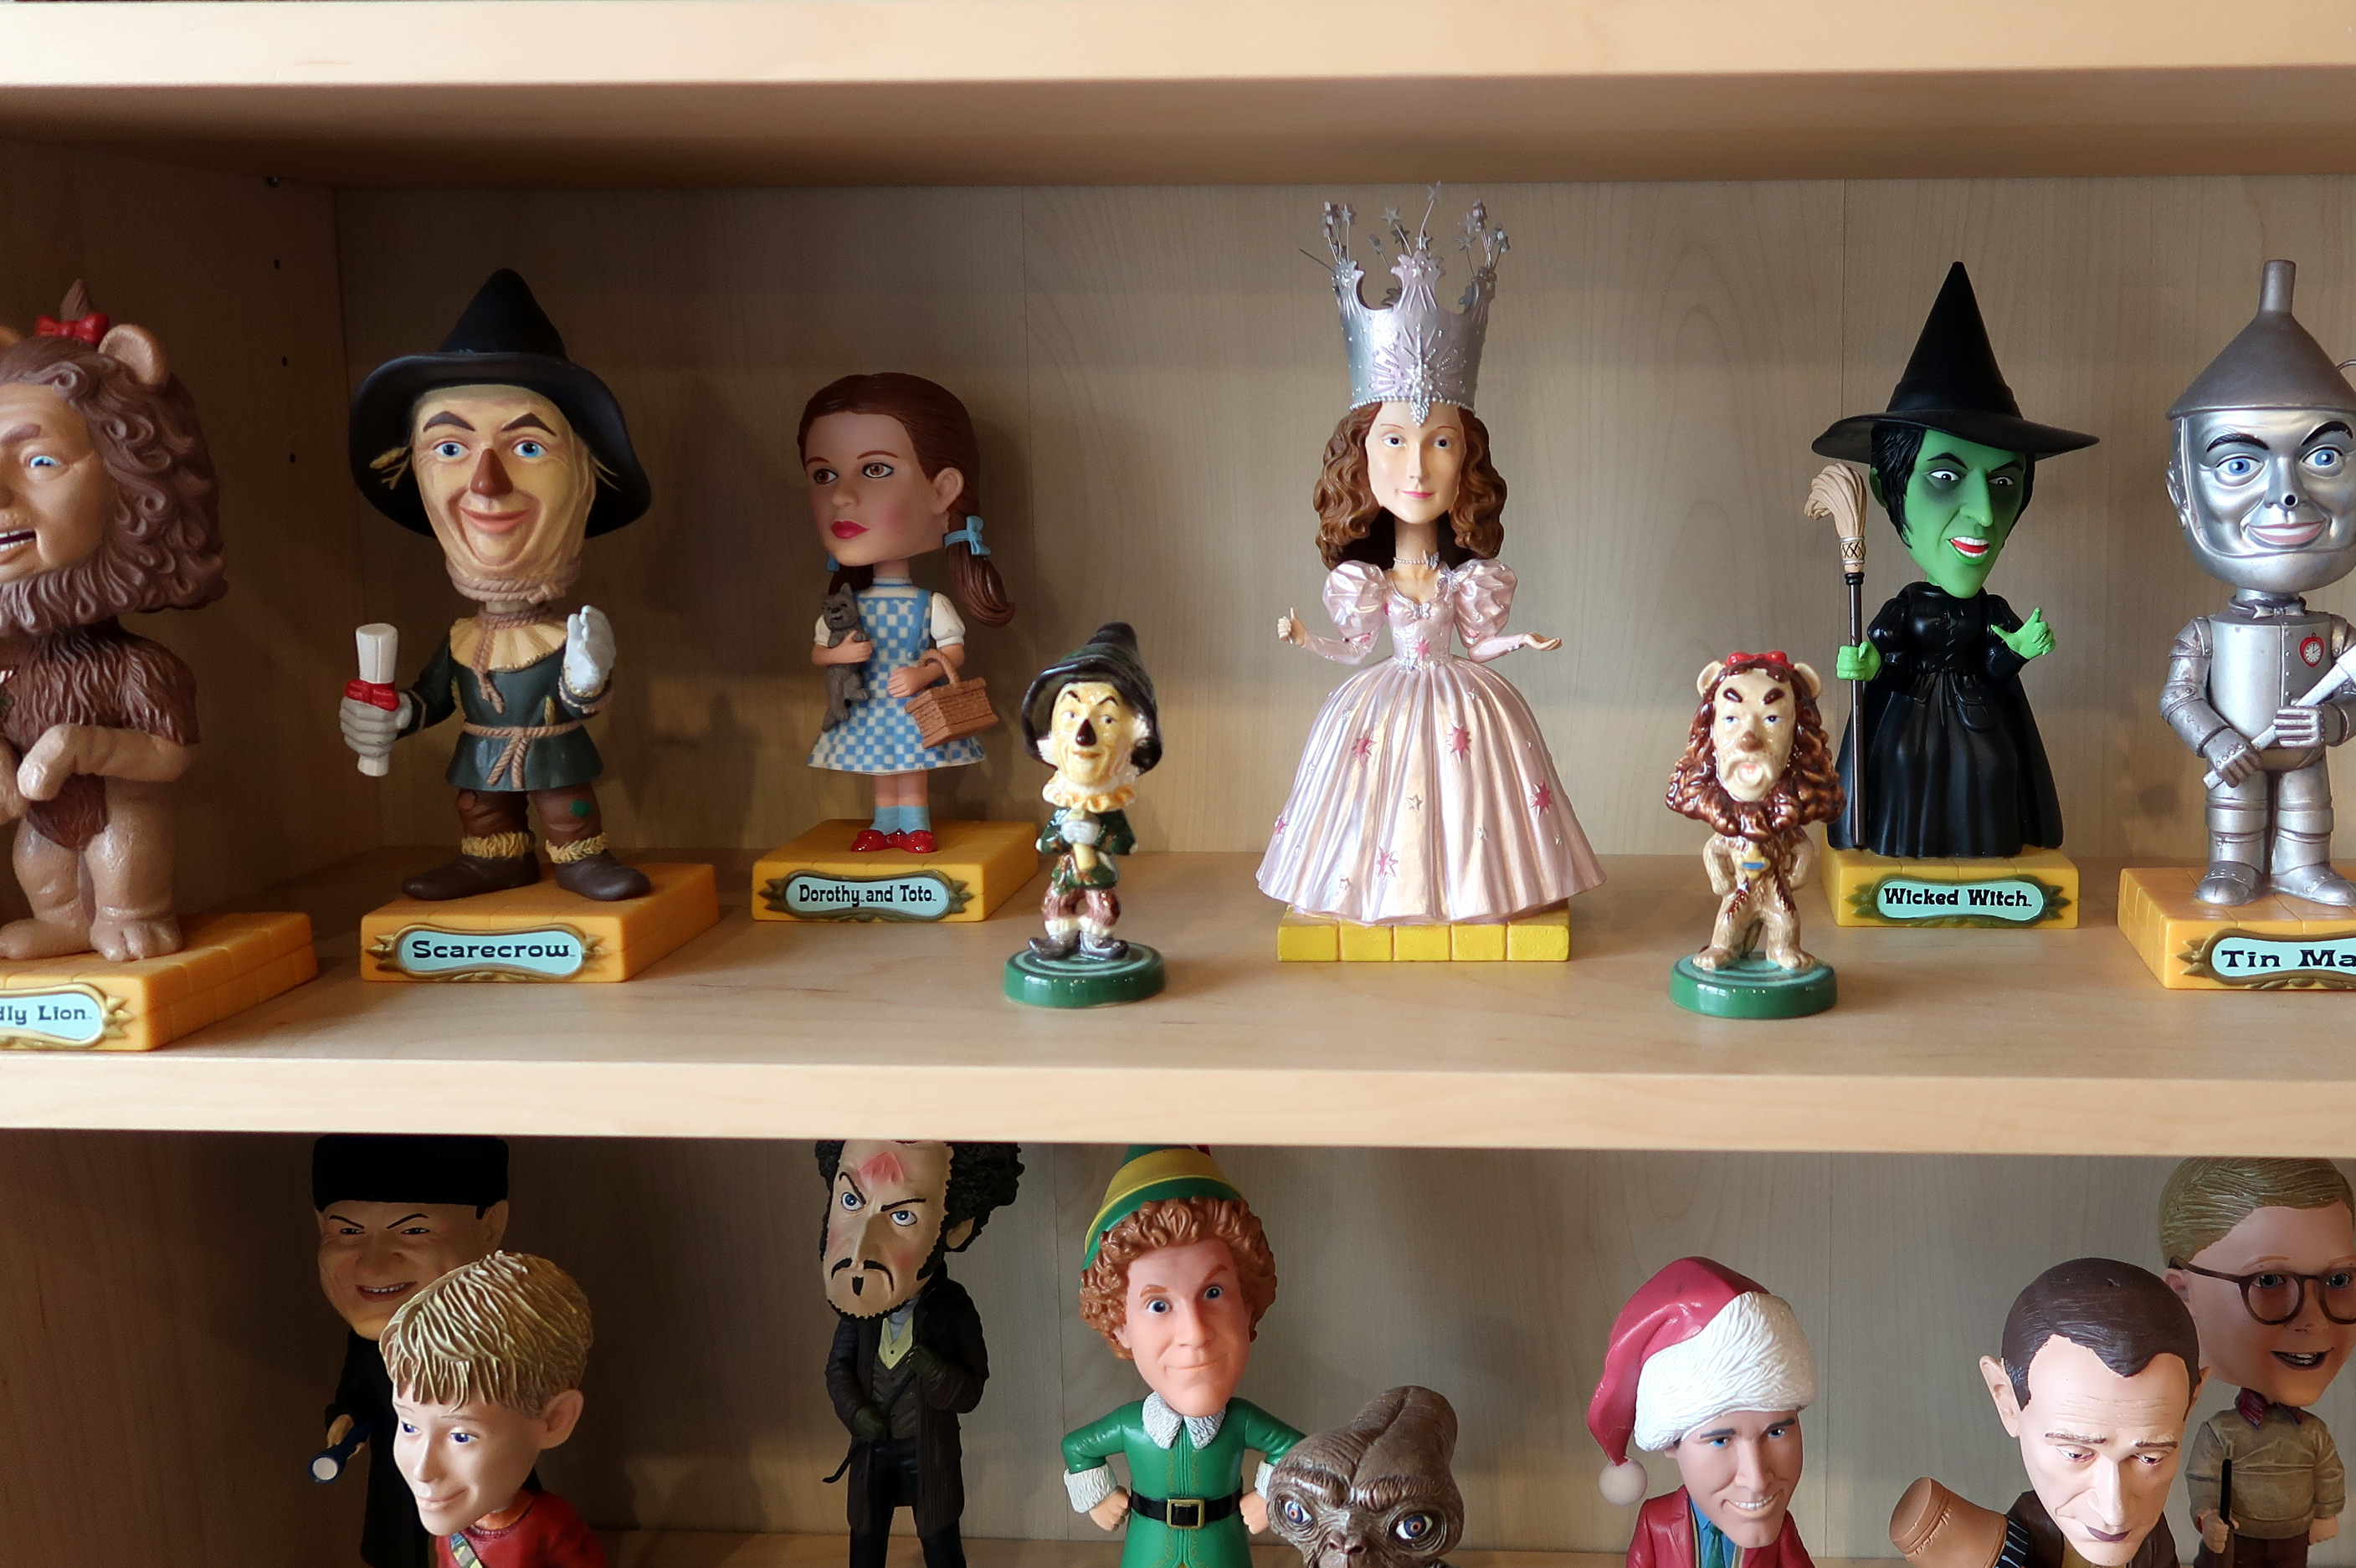 National Bobblehead Hall of Fame and Museum's Wizard of Oz characters